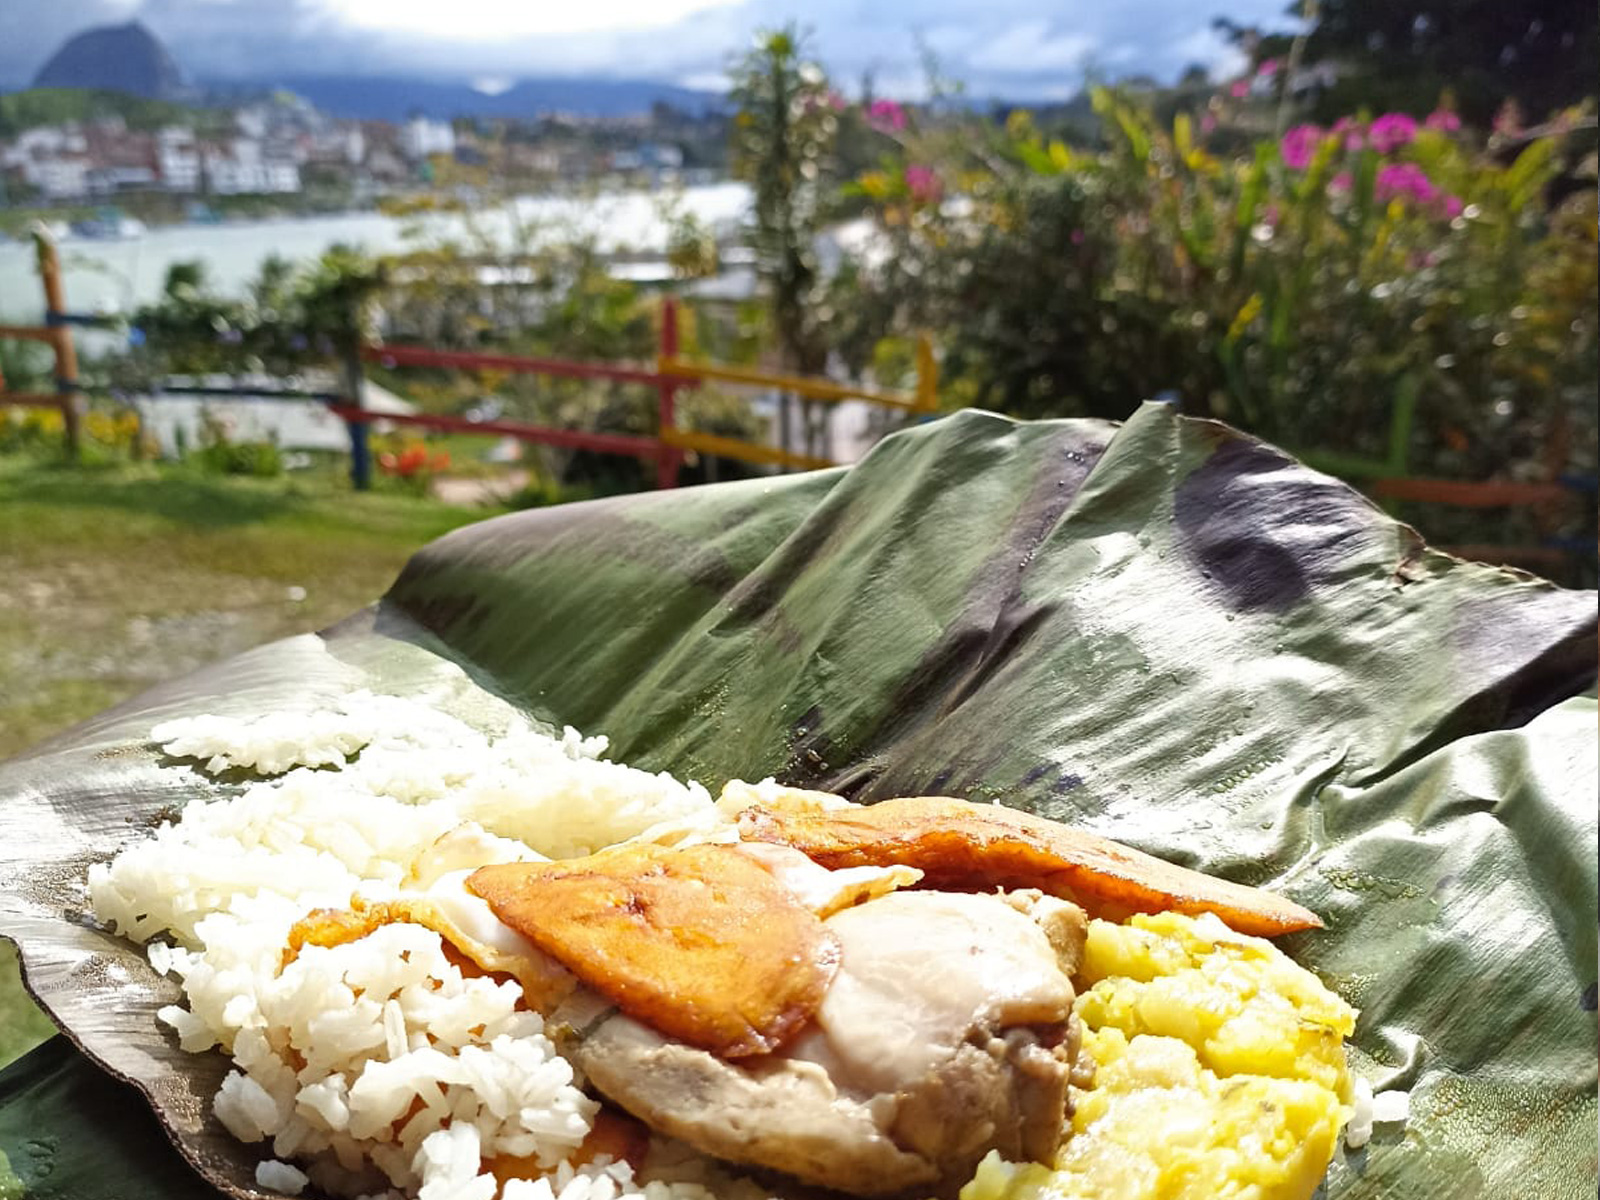 Traditional Flavors of Guatapé